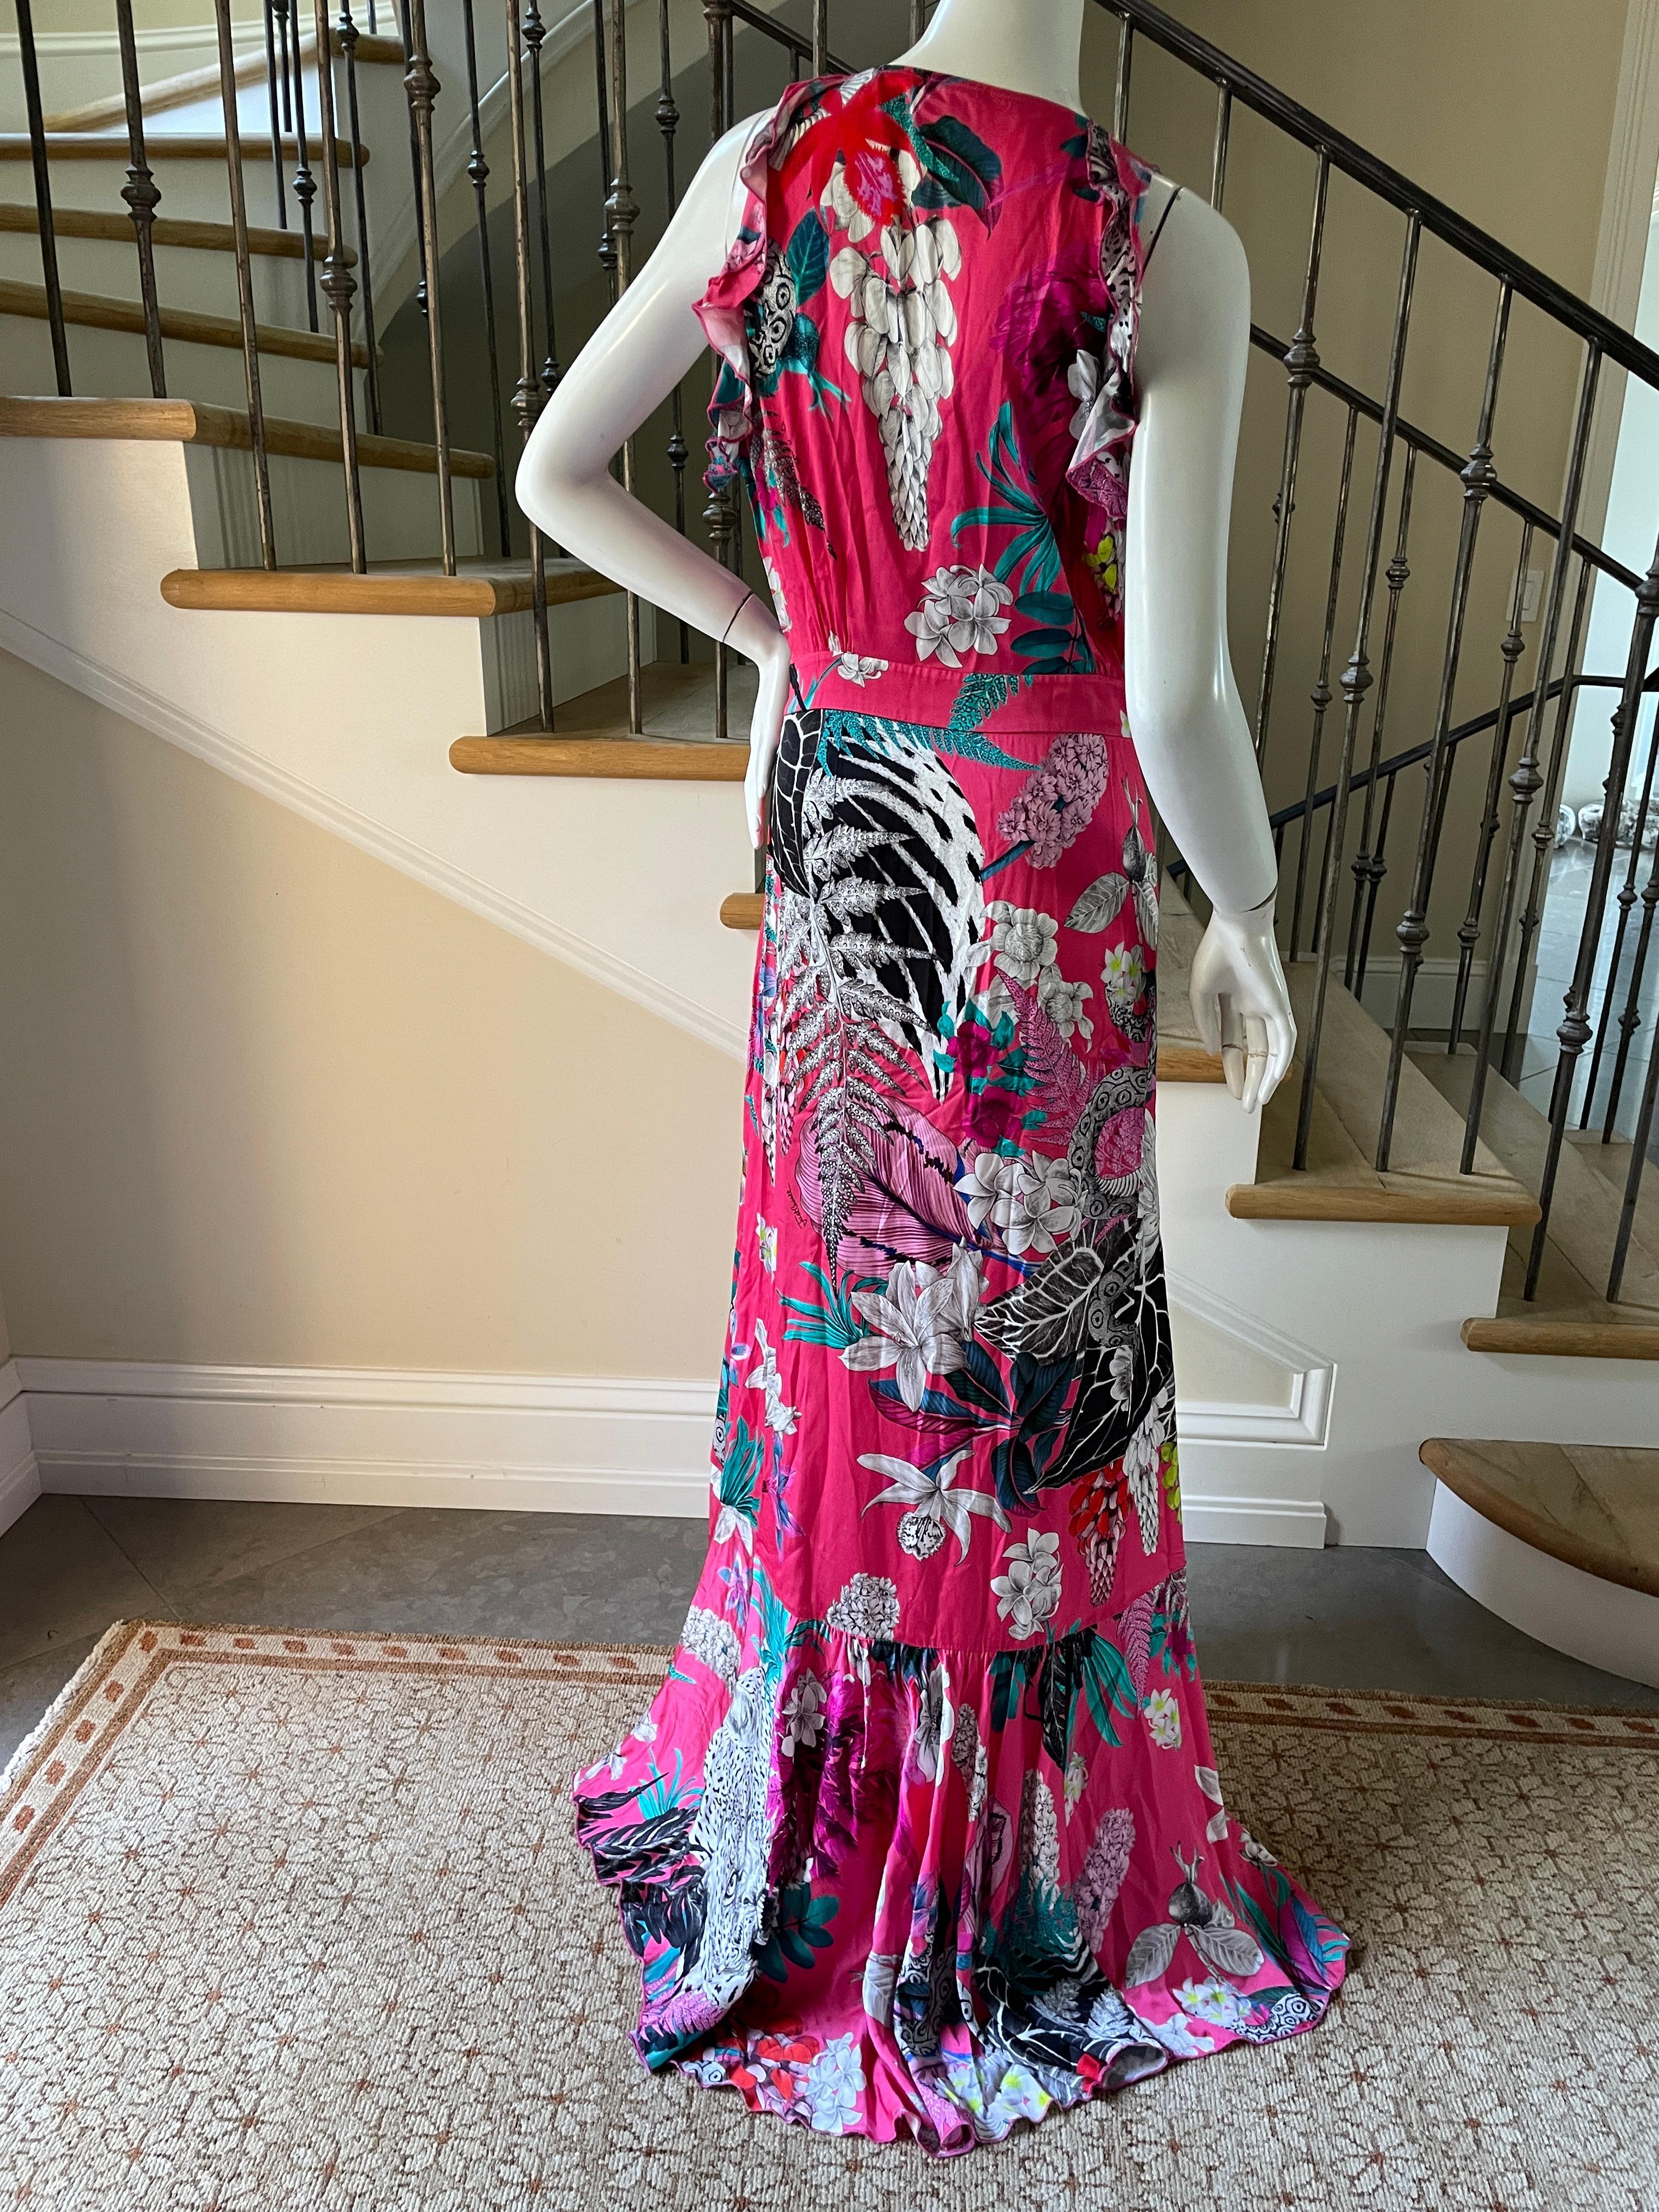 Women's Just Cavalli Ruffled Flamenco Style Evening Dress by Roberto Cavalli Size 48 For Sale